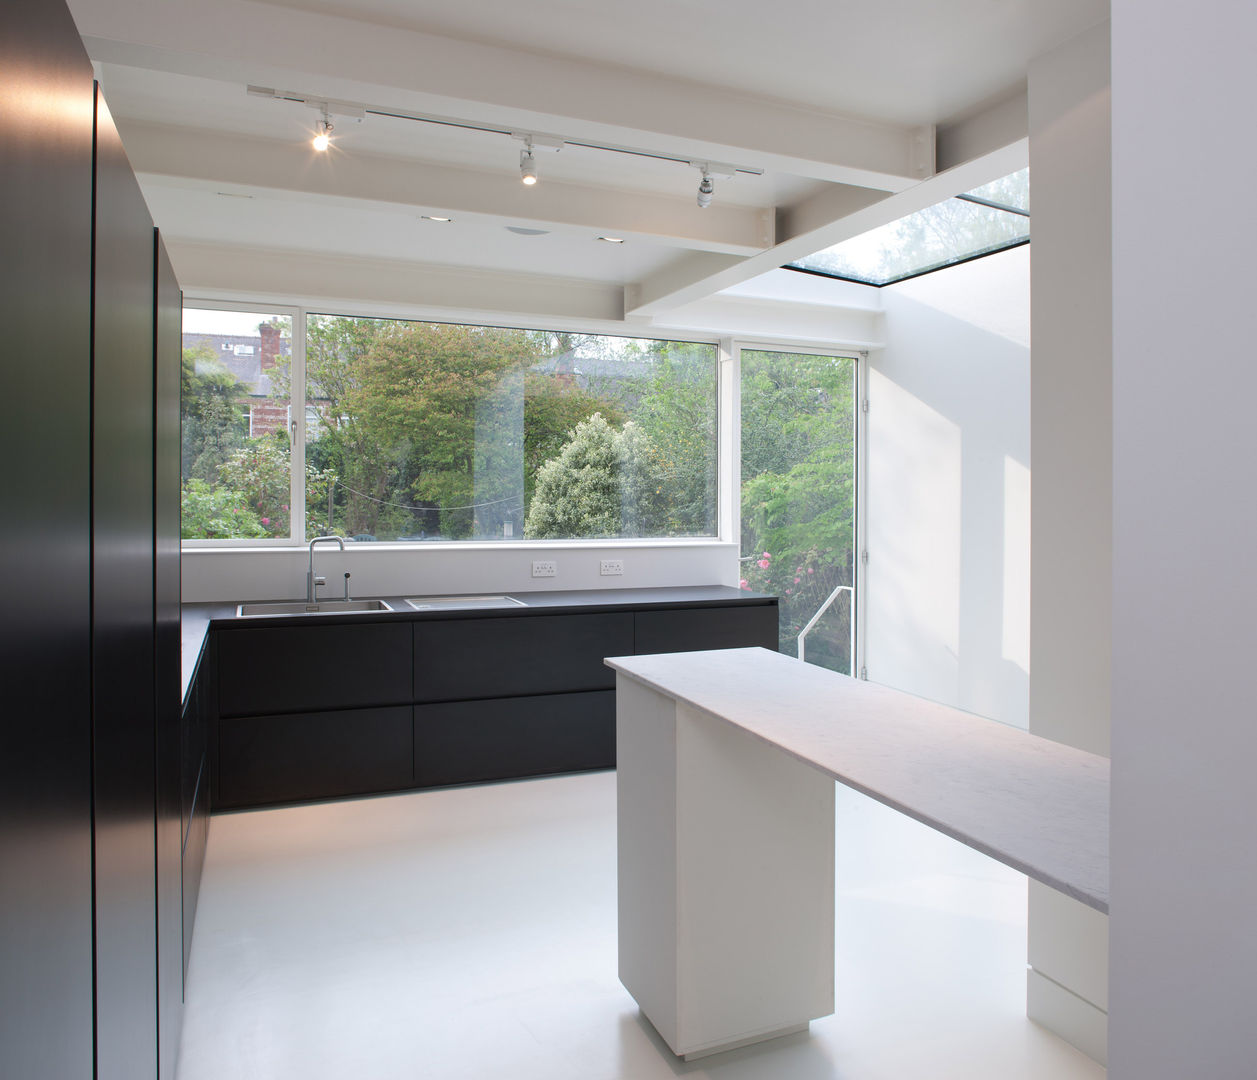 Dudley Road in Manchester, Studio Maurice Shapero Studio Maurice Shapero Modern kitchen